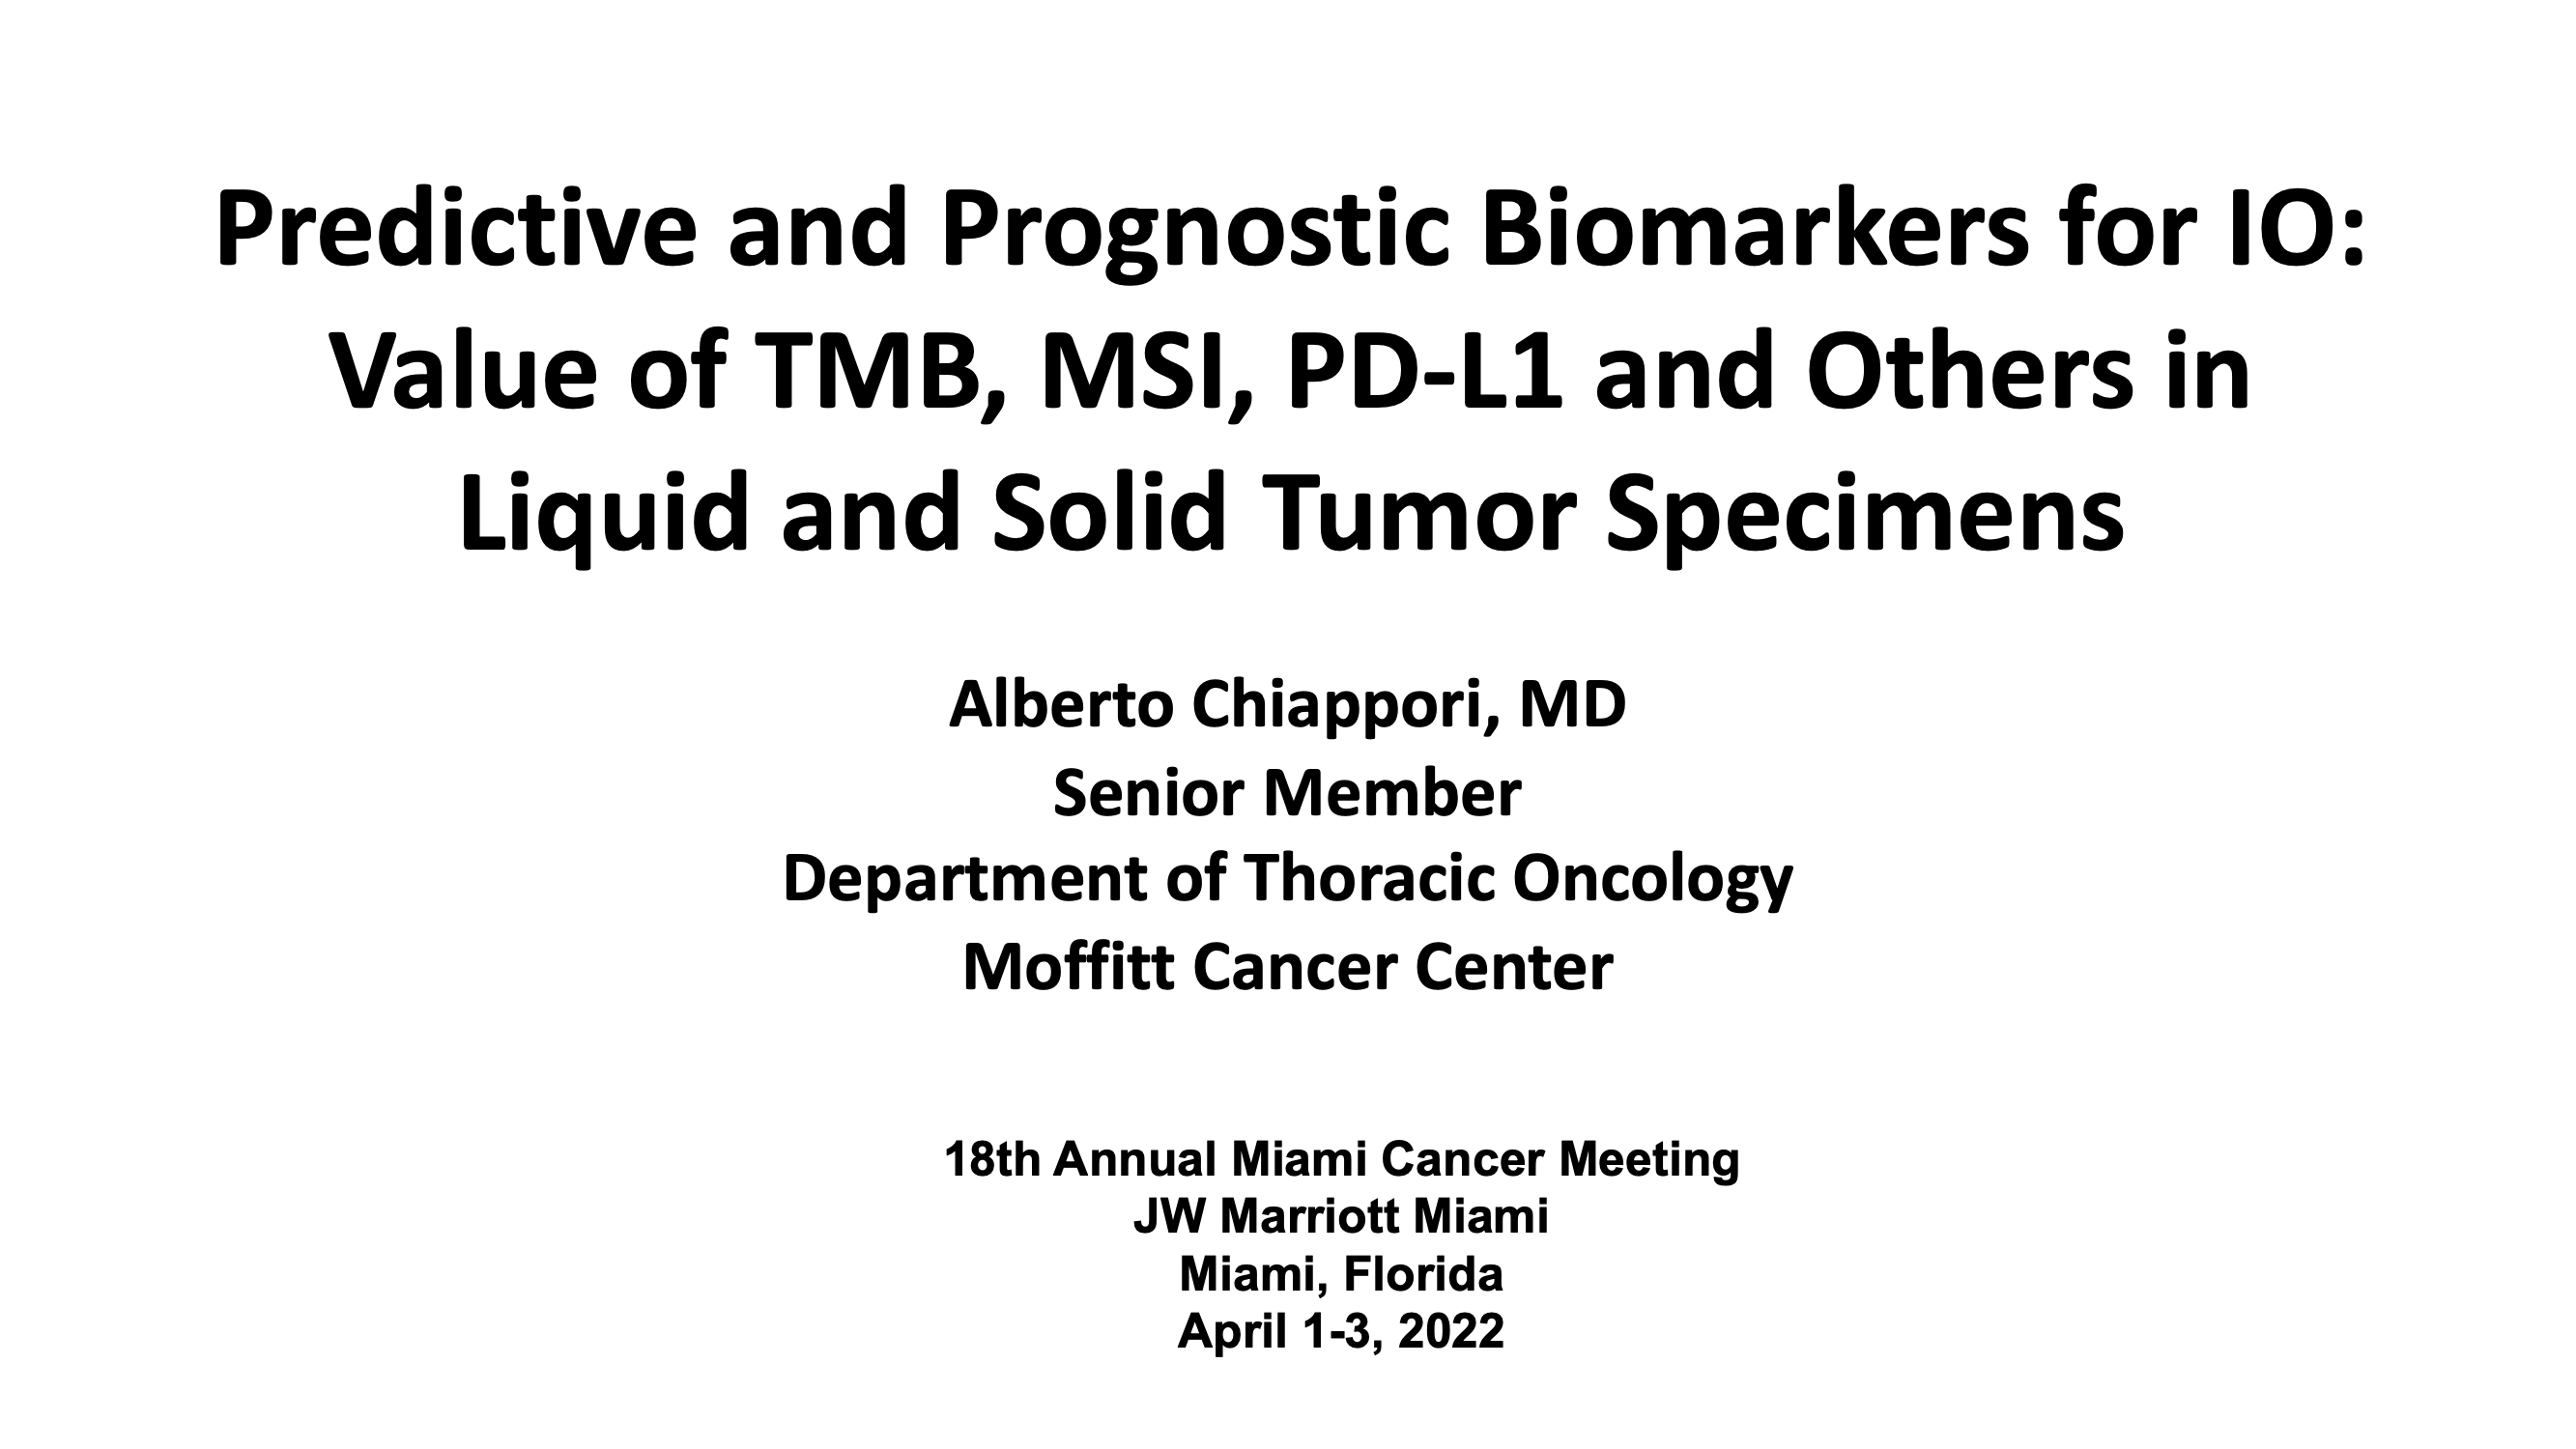 Predictive and Prognostic Biomarkers for IO: Value of TMB, MSI, PD-L1, and Others in Liquid and Solid Tumor Specimens